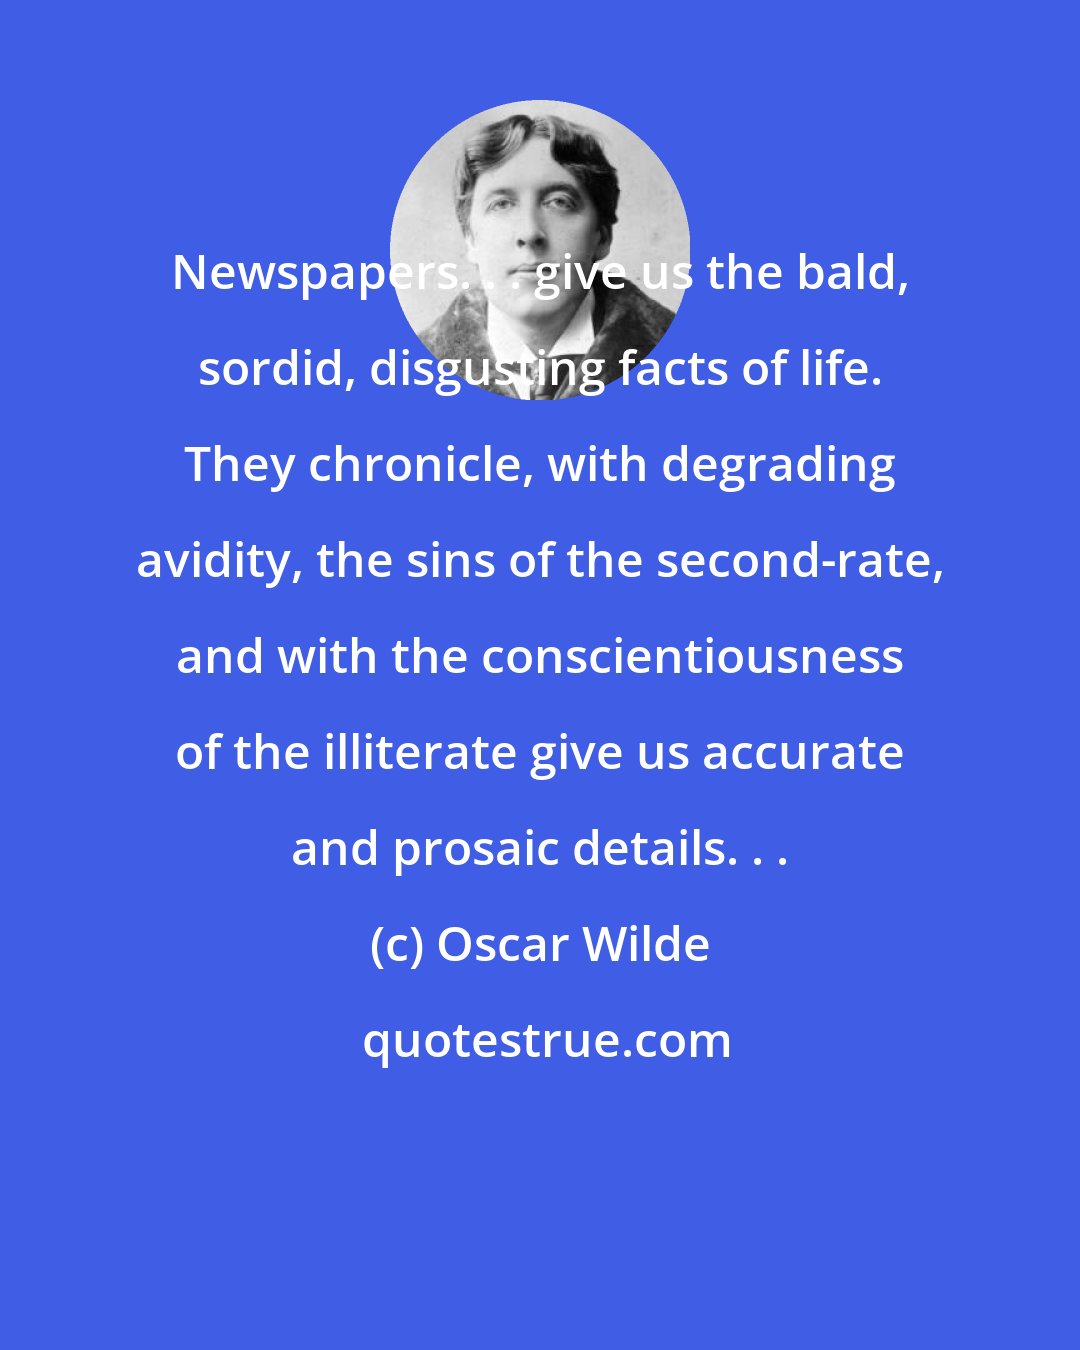 Oscar Wilde: Newspapers. . . give us the bald, sordid, disgusting facts of life. They chronicle, with degrading avidity, the sins of the second-rate, and with the conscientiousness of the illiterate give us accurate and prosaic details. . .